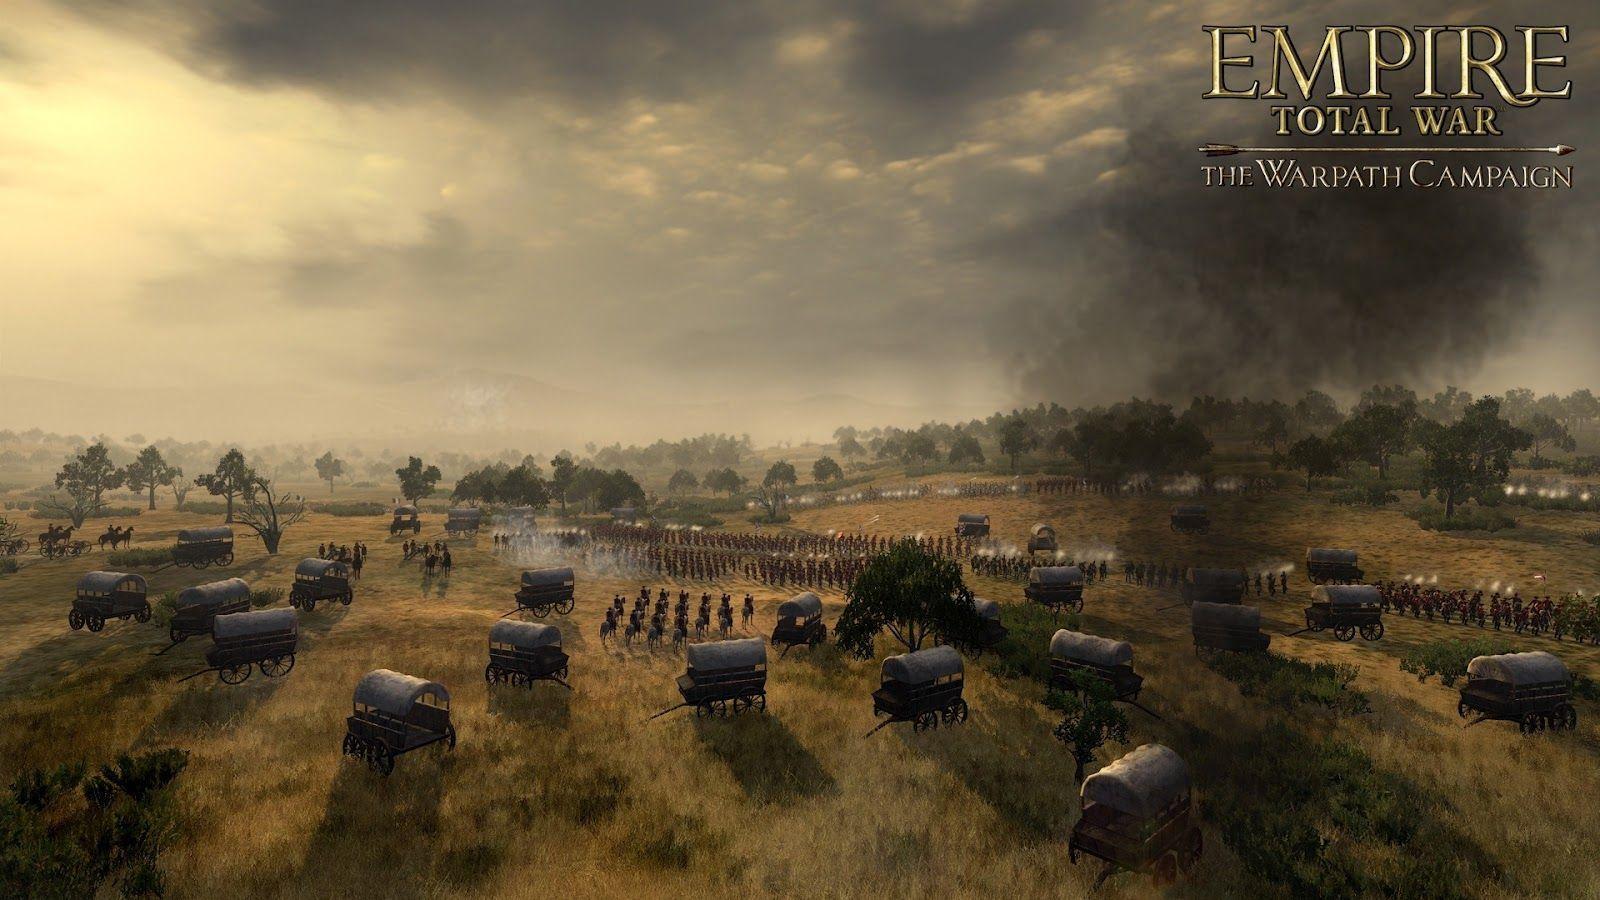 Empire Total War Wallpaper and Theme for Windows 7